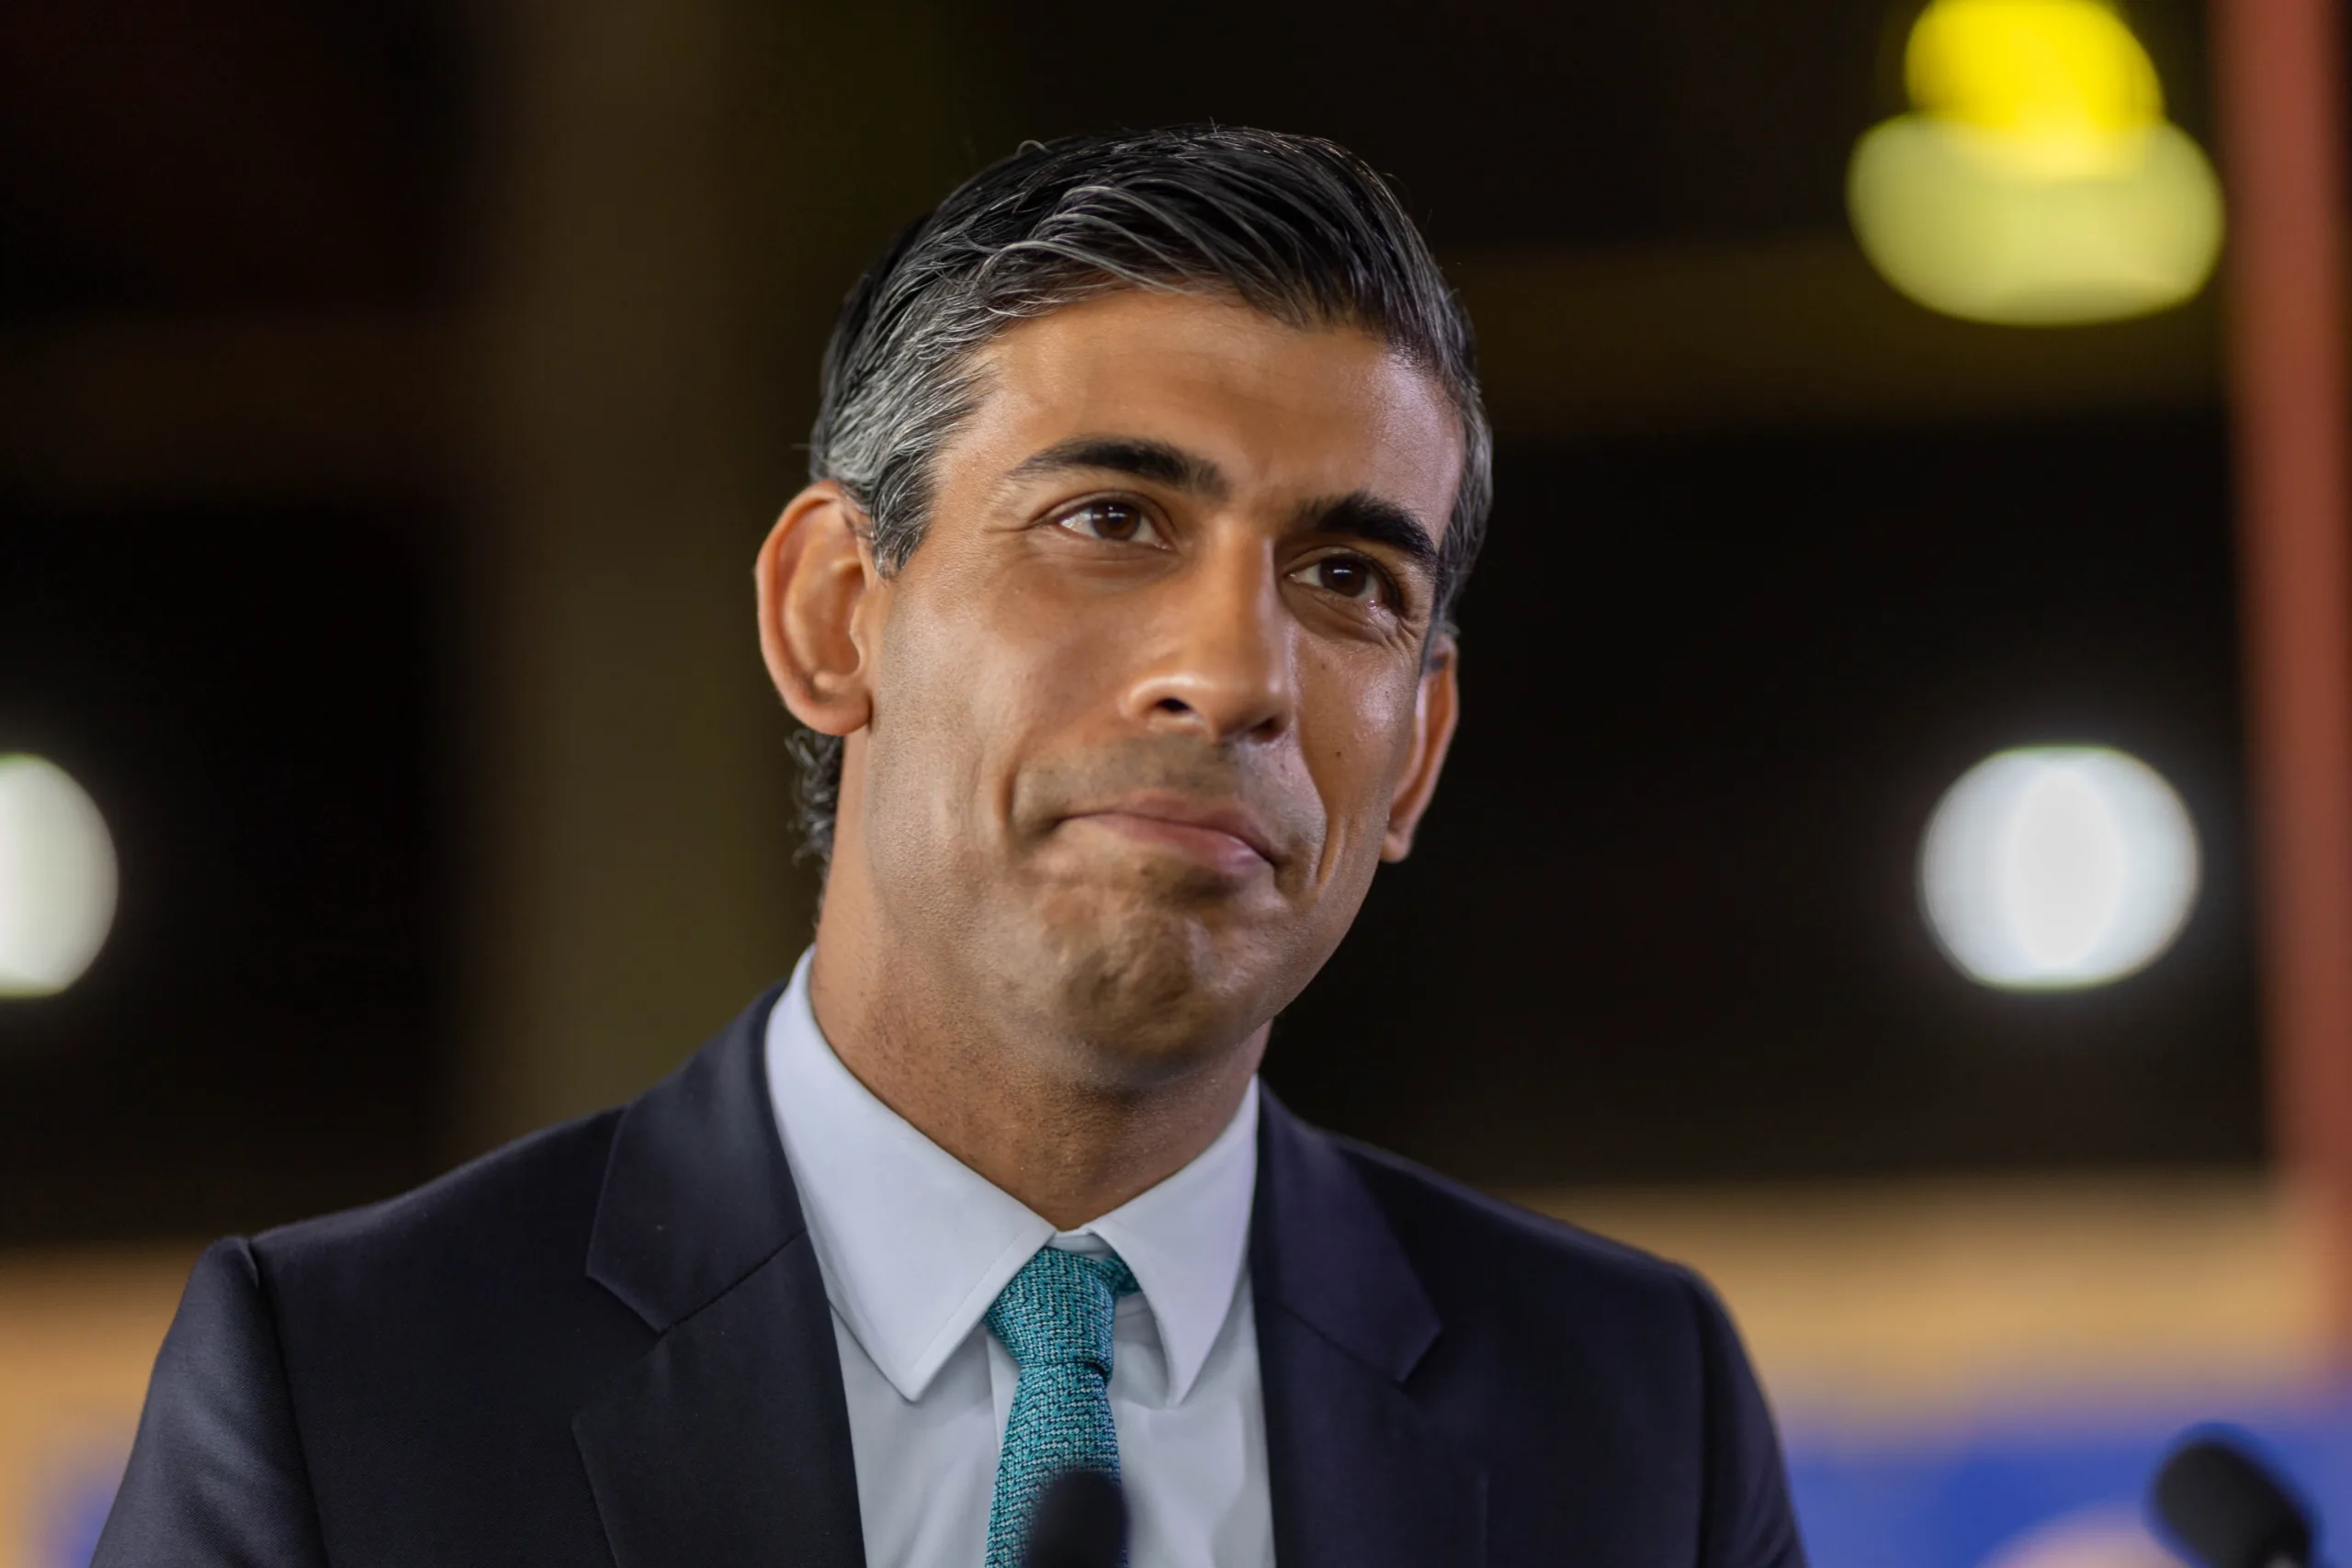 Labour tells Rishi Sunak: “If we had a dedicated Minister for Disabled People with strong influence in Government then things could be very different”